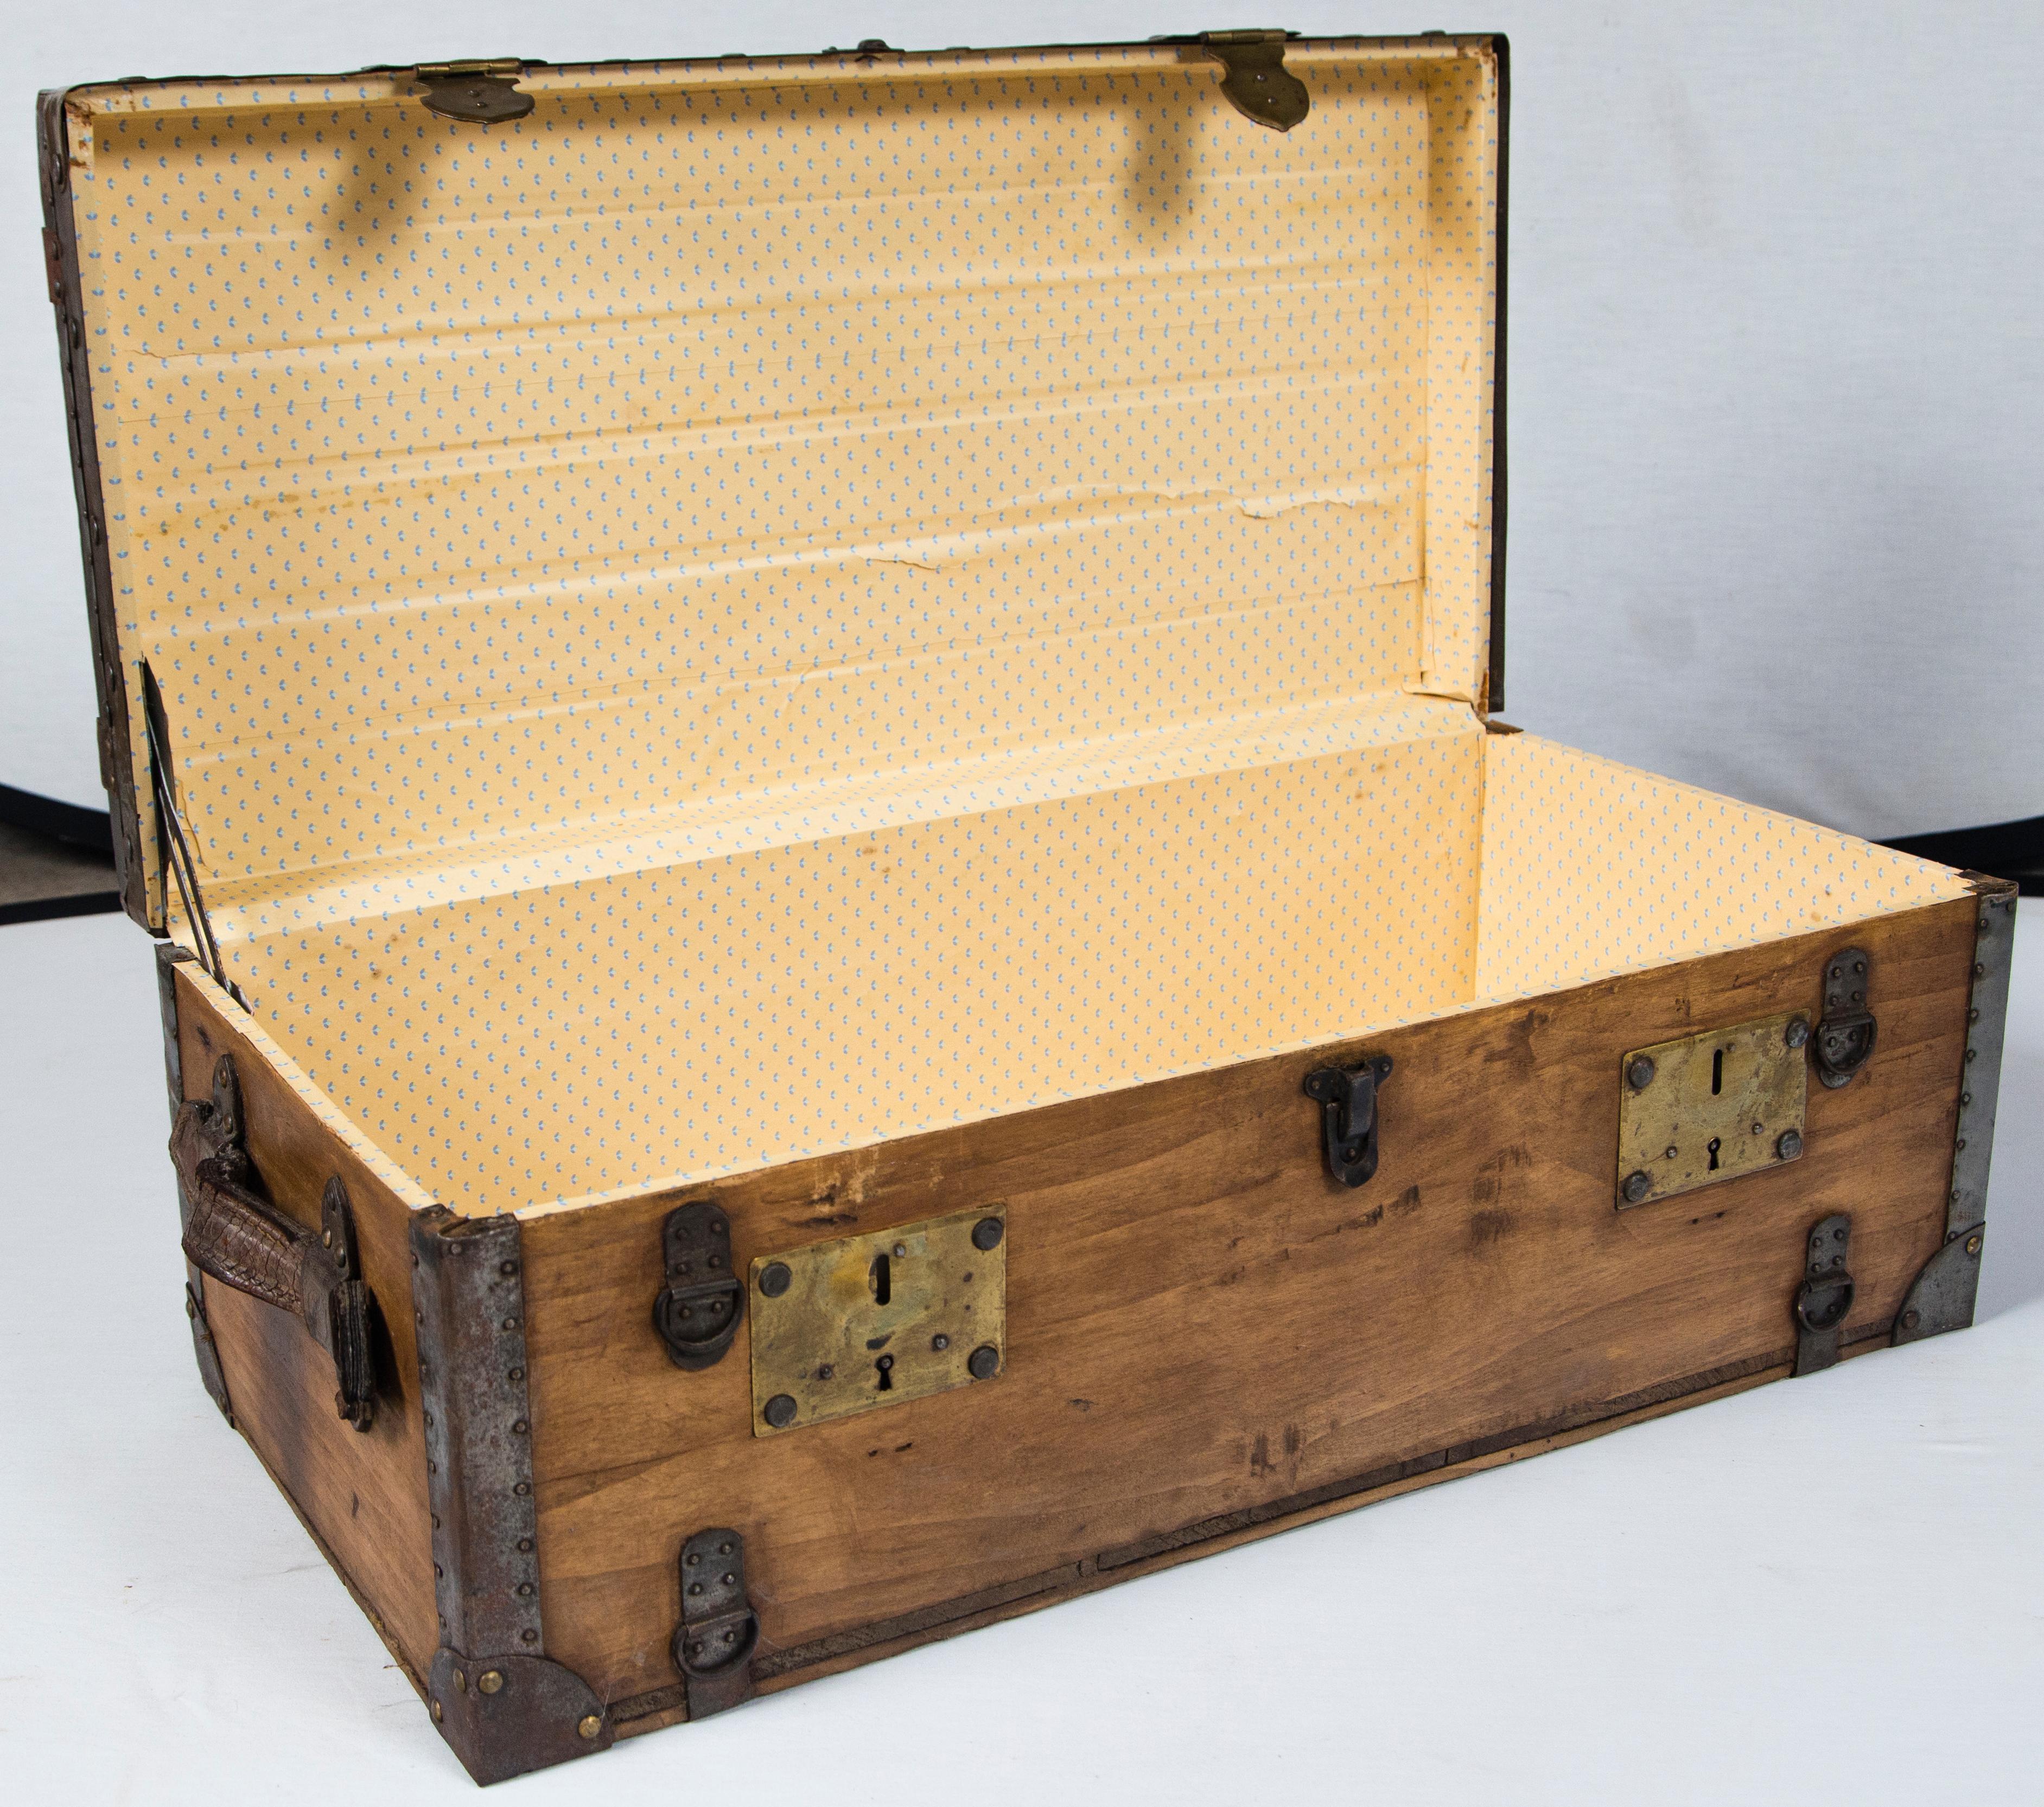 20th Century Vintage French Travel Trunk, circa 1920s